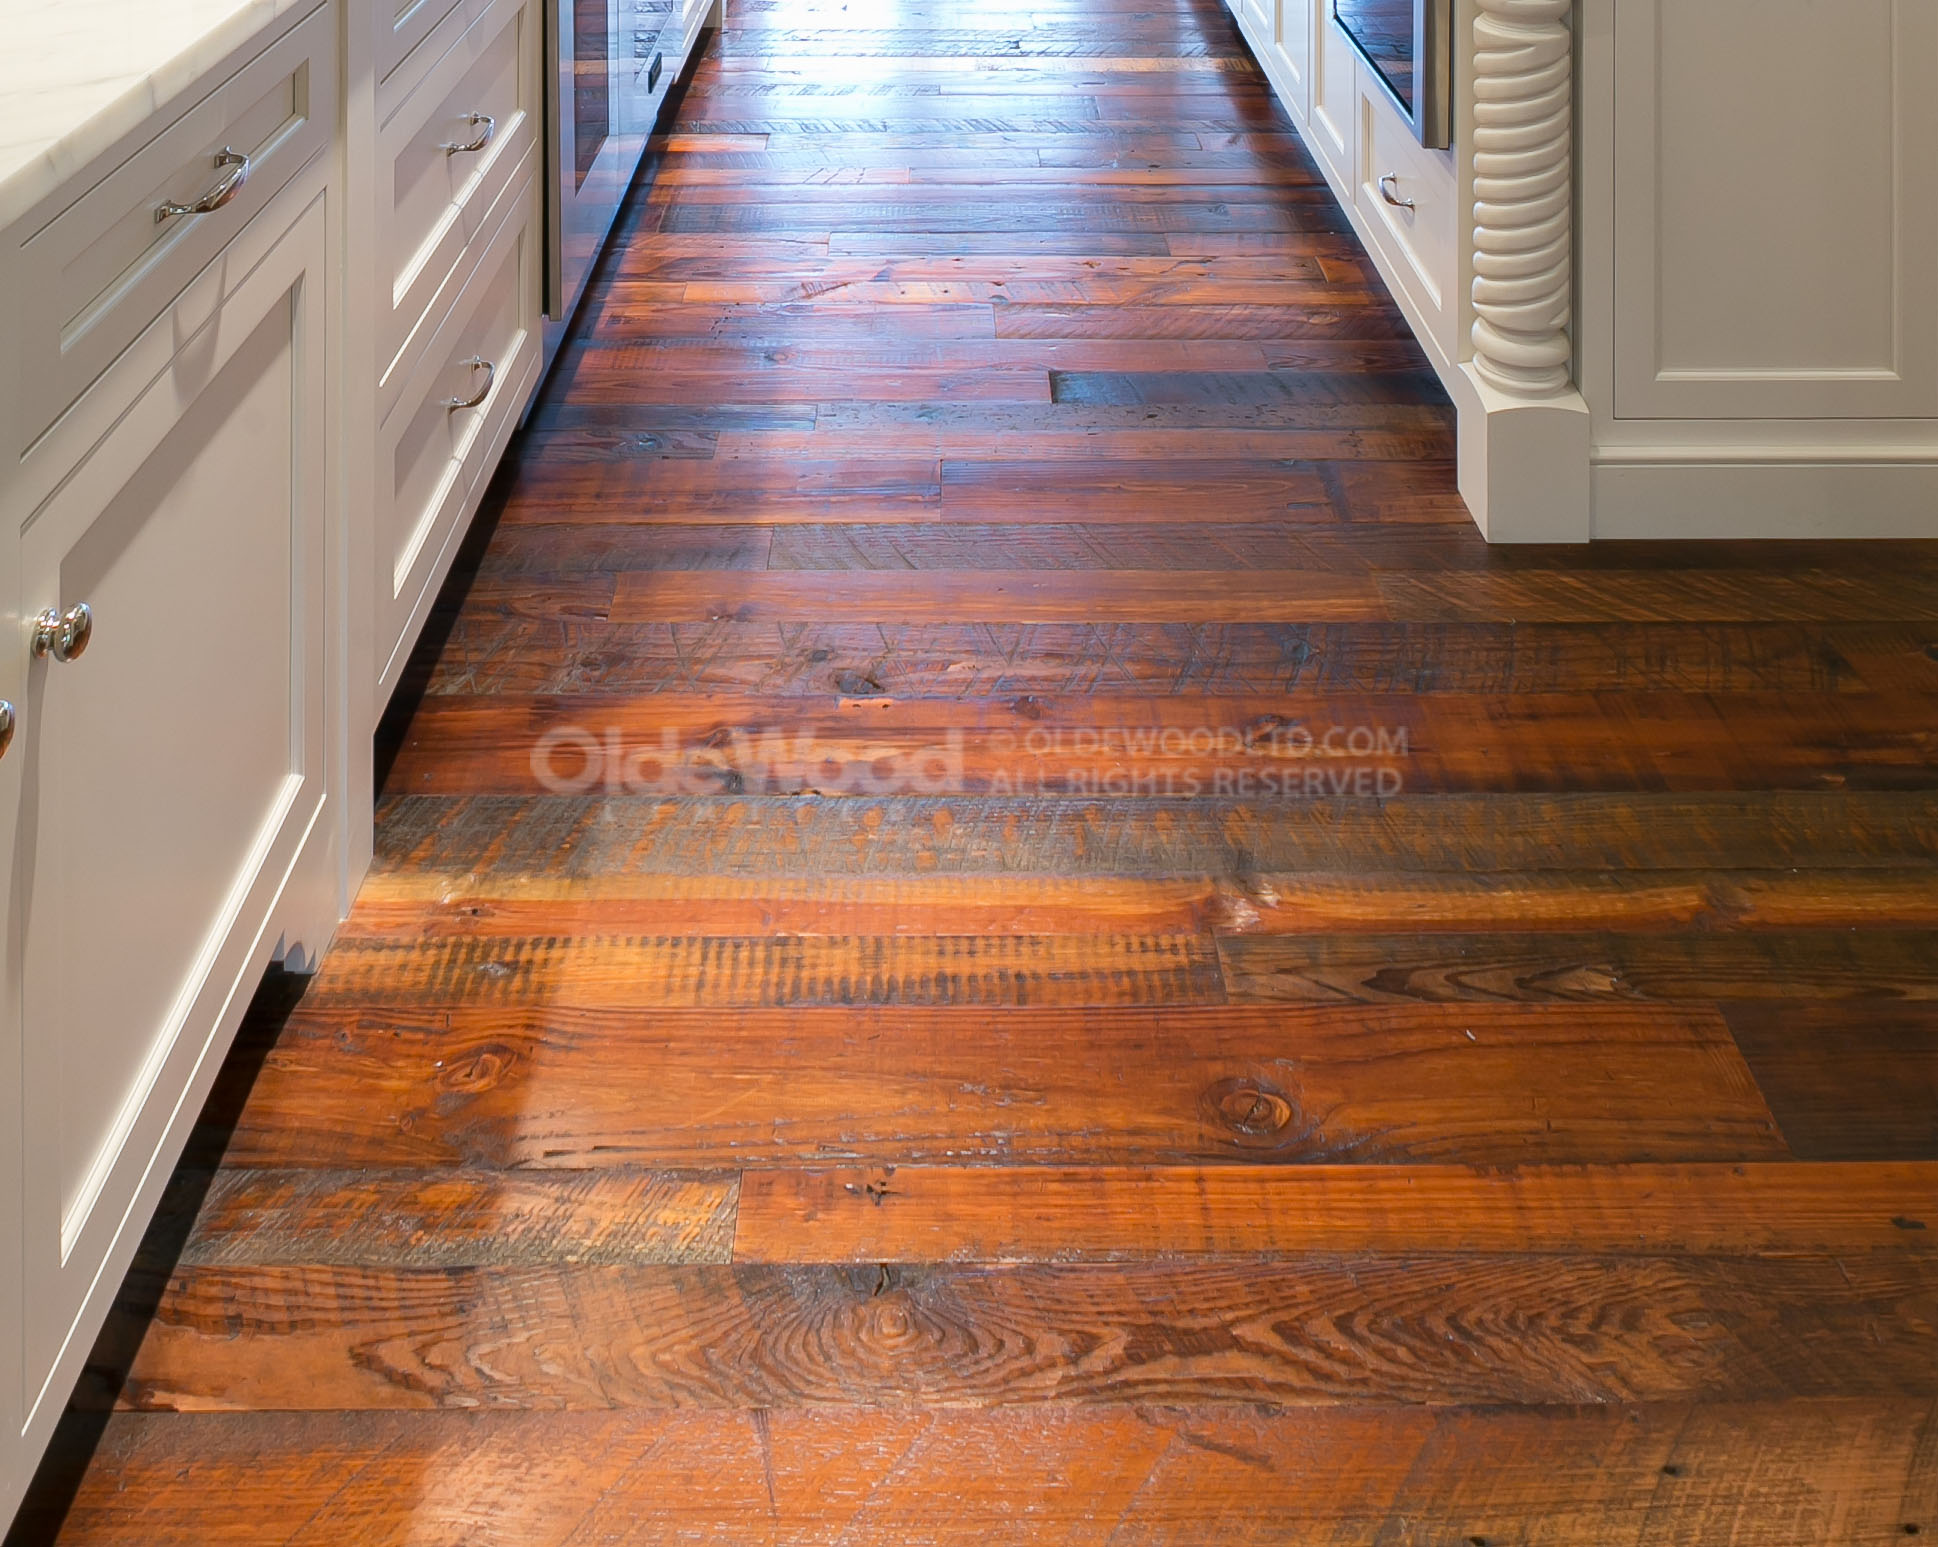 Antique Reclaimed Wood Flooring Olde, How Much Is Reclaimed Wood Flooring Worth